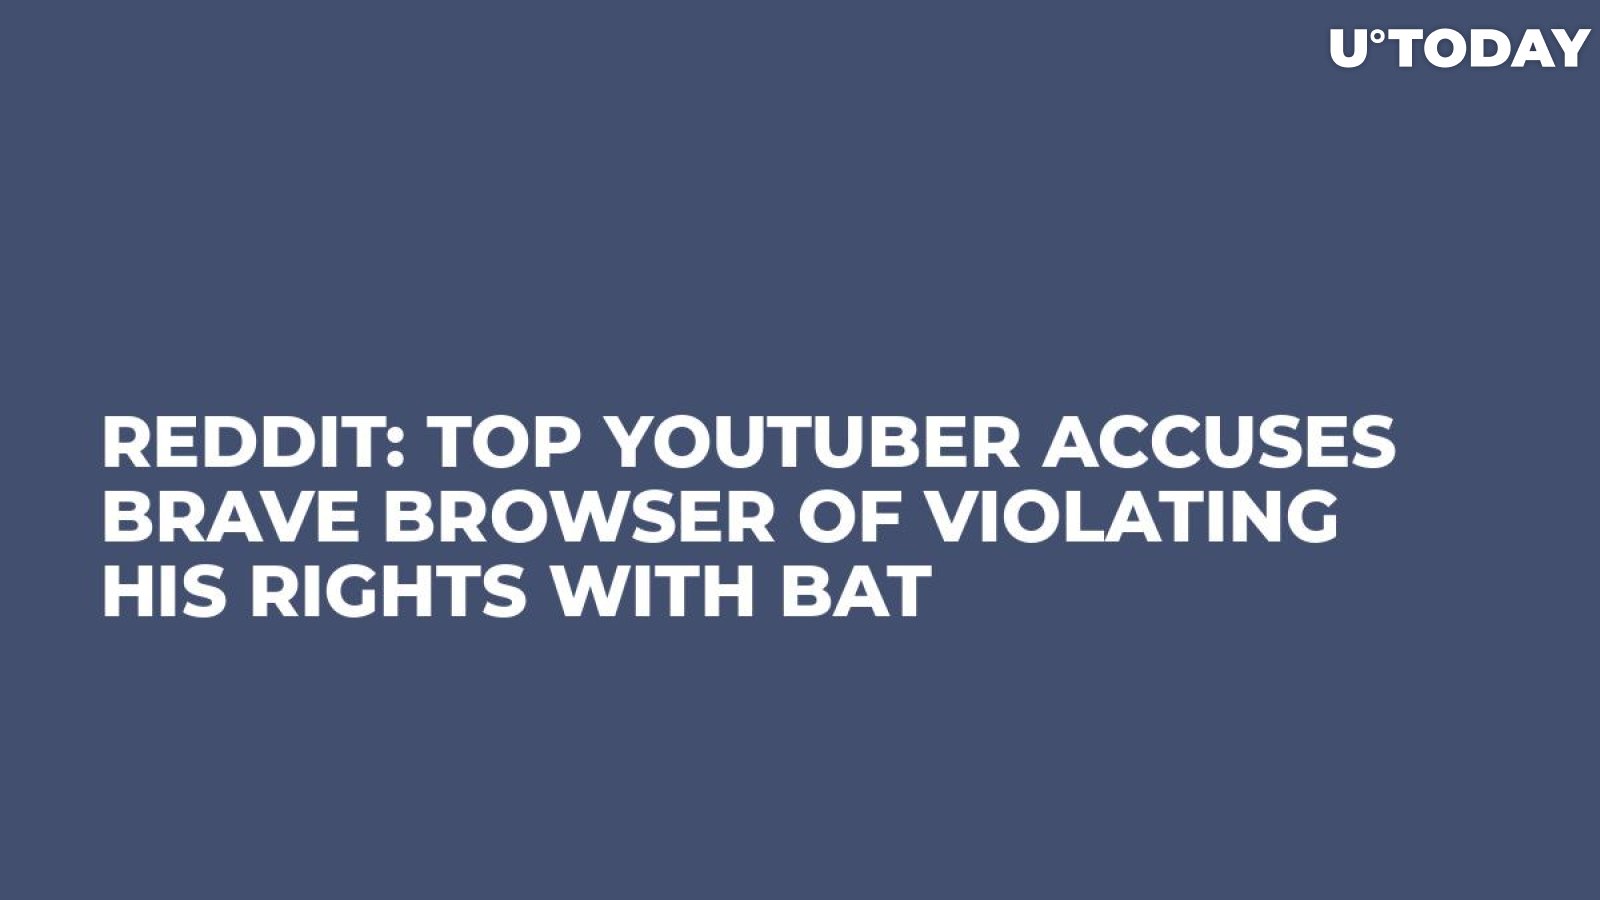 Reddit: Top YouTuber Accuses Brave Browser of Violating His Rights with BAT